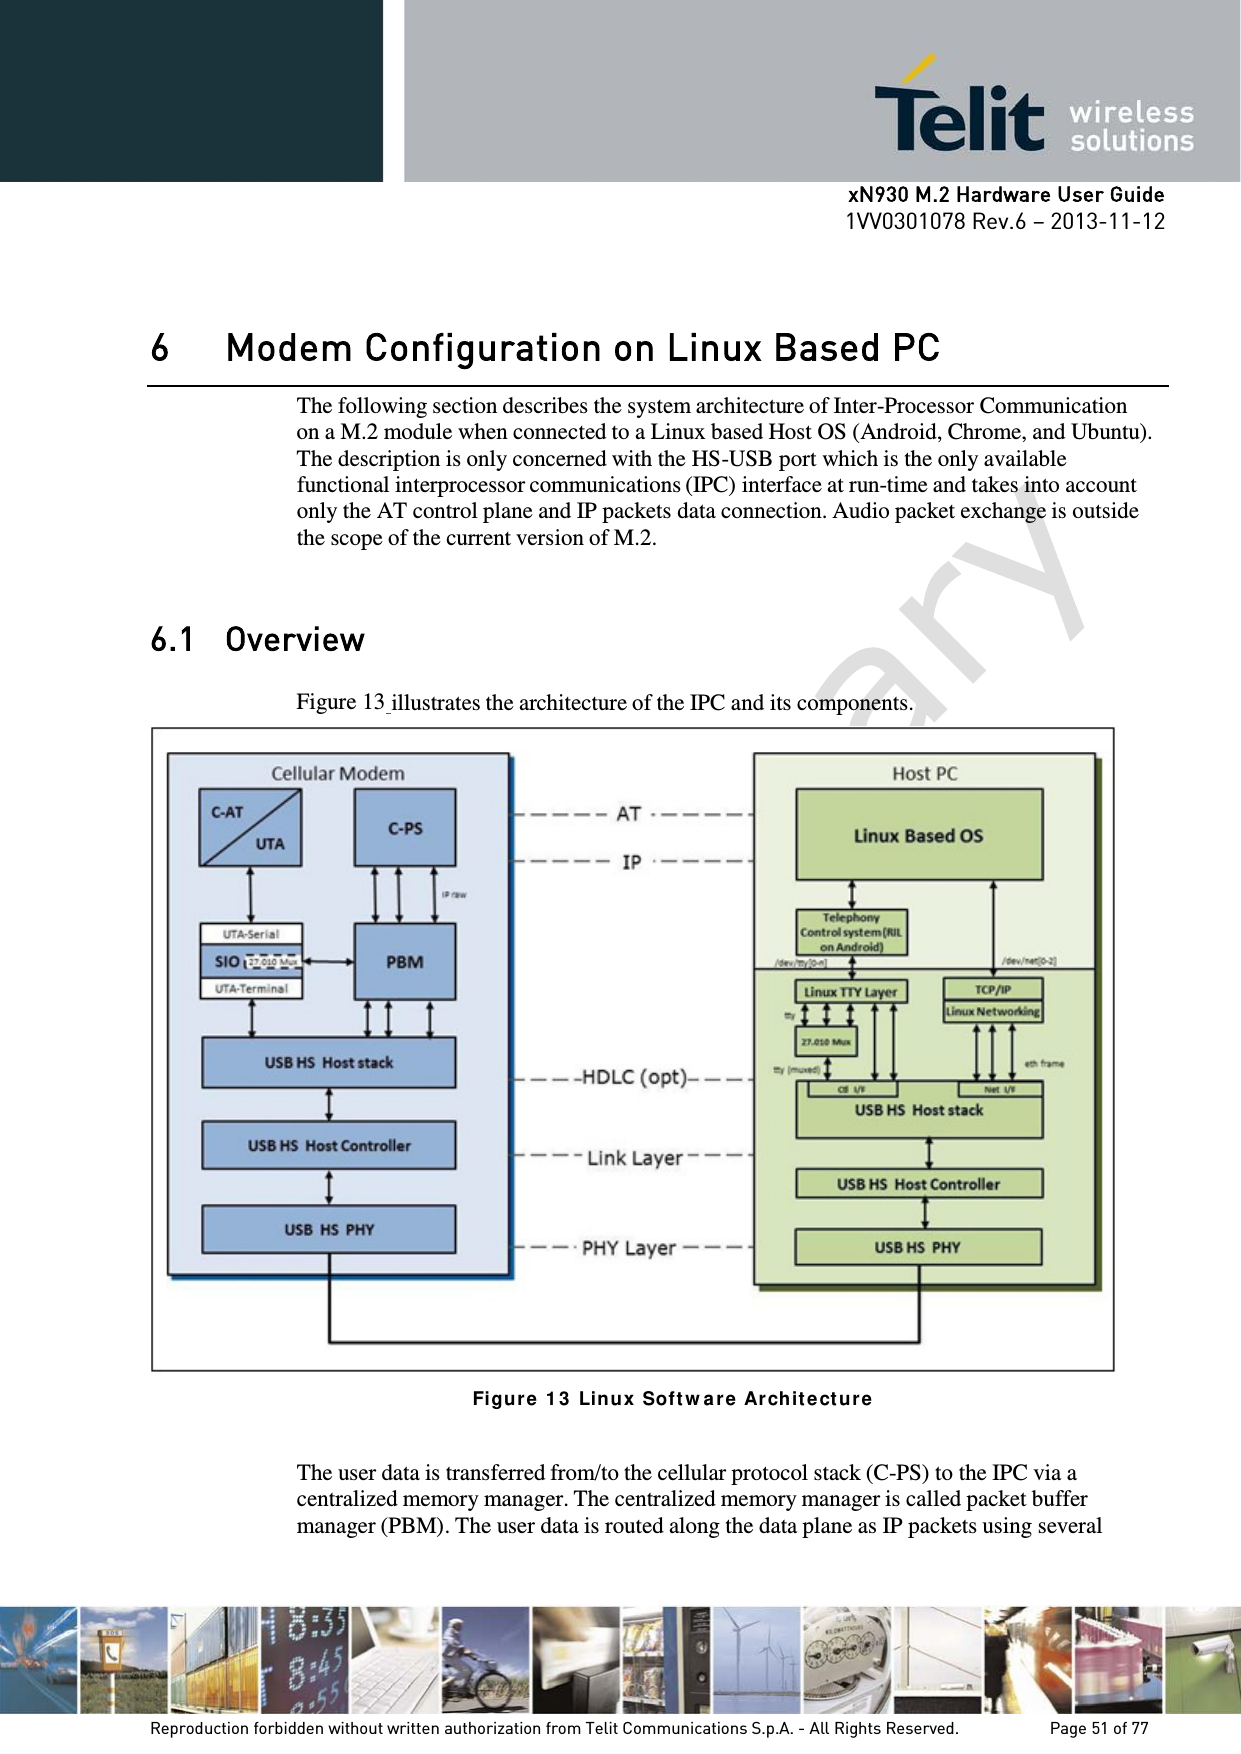      xN930 M.2 Hardware User Guide 1VV0301078 Rev.6 – 2013-11-12    6 Modem Configuration on Linux Based PC The following section describes the system architecture of Inter-Processor Communication on a M.2 module when connected to a Linux based Host OS (Android, Chrome, and Ubuntu). The description is only concerned with the HS-USB port which is the only available functional interprocessor communications (IPC) interface at run-time and takes into account only the AT control plane and IP packets data connection. Audio packet exchange is outside the scope of the current version of M.2.   6.1 Overview  Figure 13 illustrates the architecture of the IPC and its components.  Figur e 1 3  Linux  Soft w are  Ar chit e ct u re  The user data is transferred from/to the cellular protocol stack (C-PS) to the IPC via a centralized memory manager. The centralized memory manager is called packet buffer manager (PBM). The user data is routed along the data plane as IP packets using several   Reproduction forbidden without written authorization from Telit Communications S.p.A. - All Rights Reserved.    Page 51 of 77 